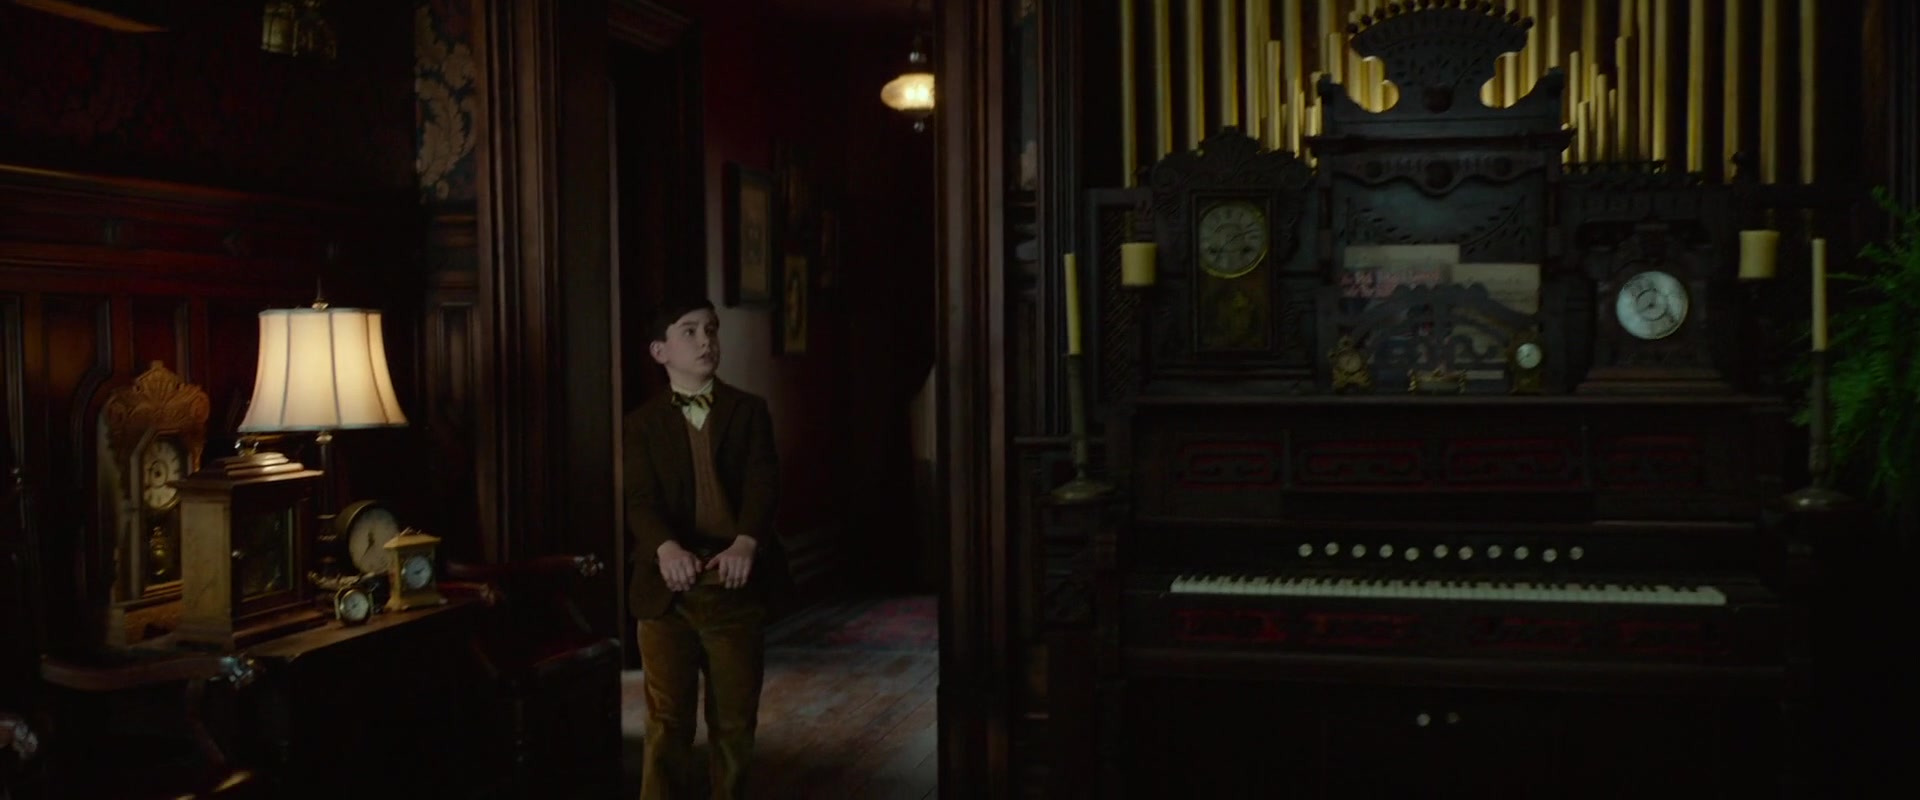 Owen Vaccaro in The House with a Clock in Its Walls